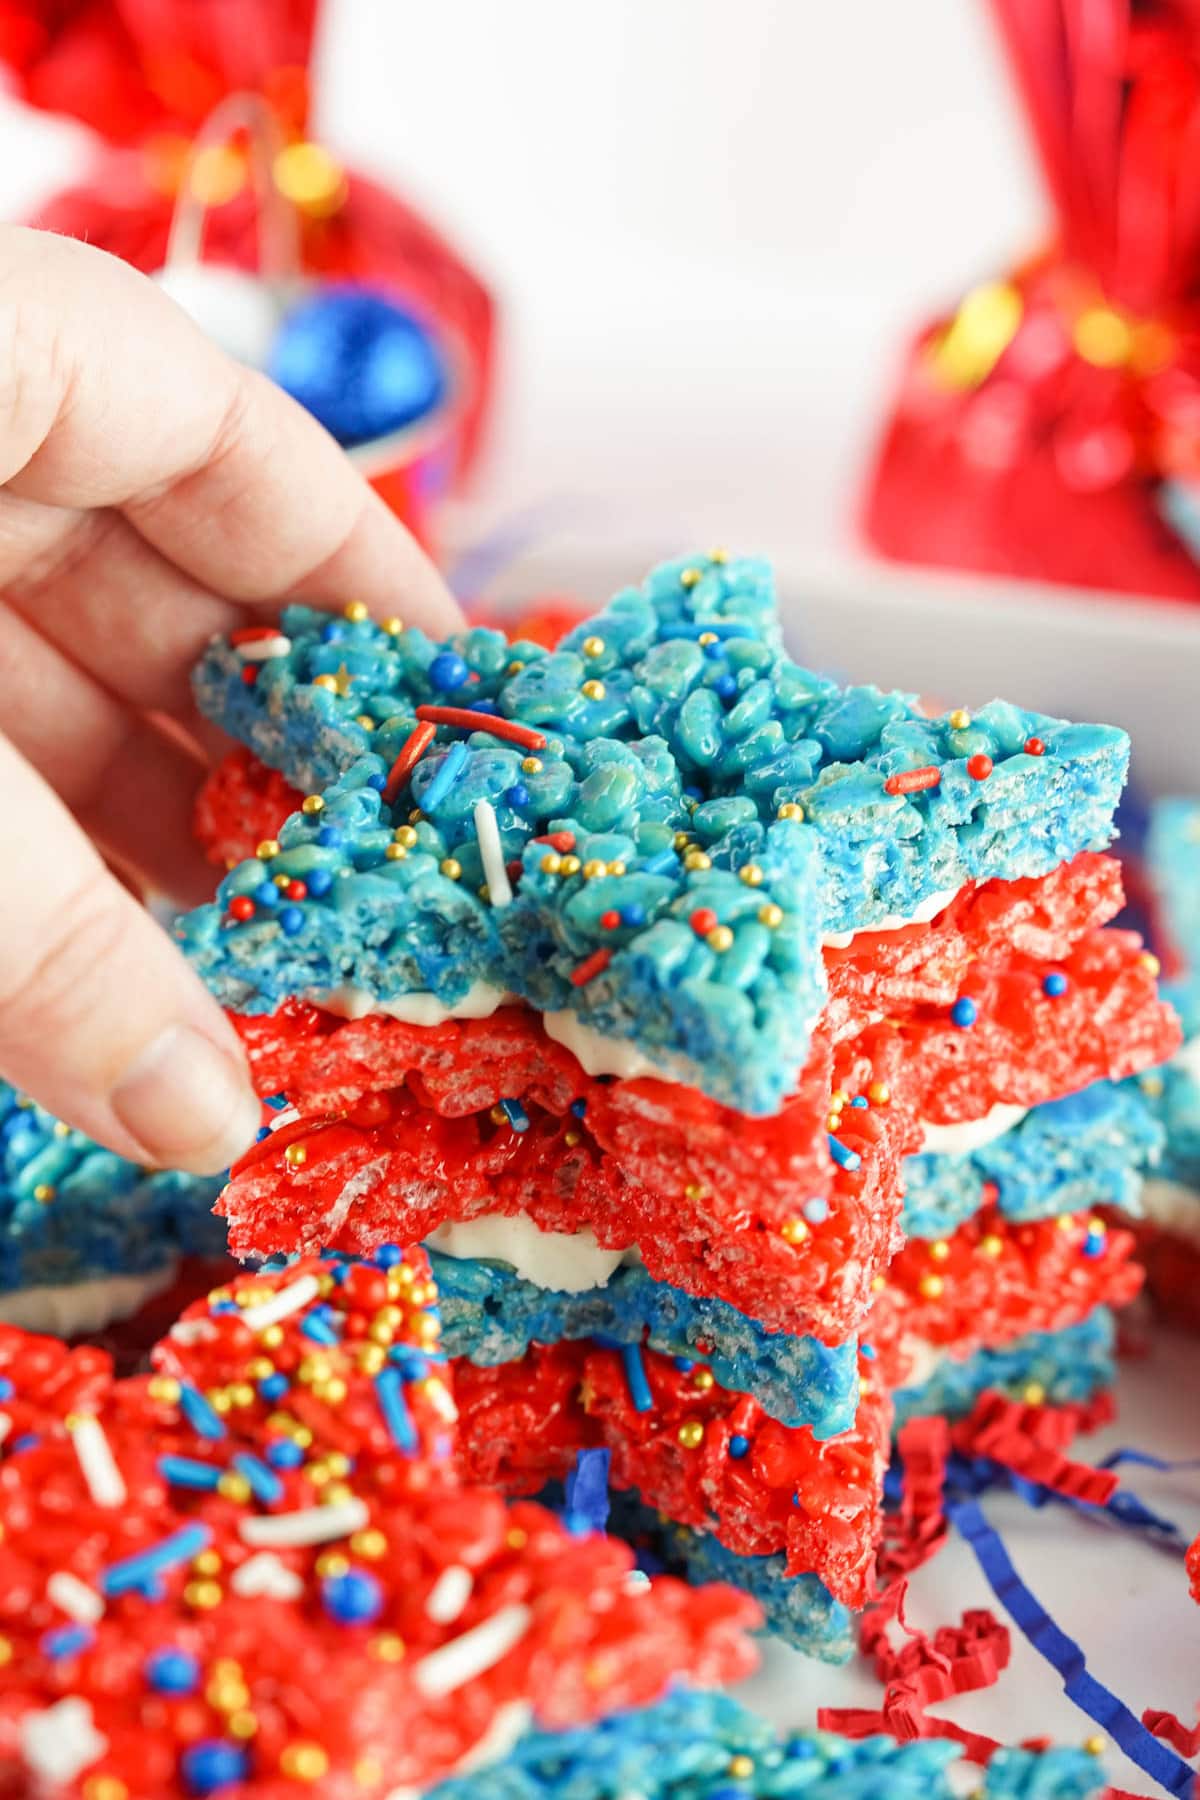 Hand picking up a 4th of July Rice Krispie treat